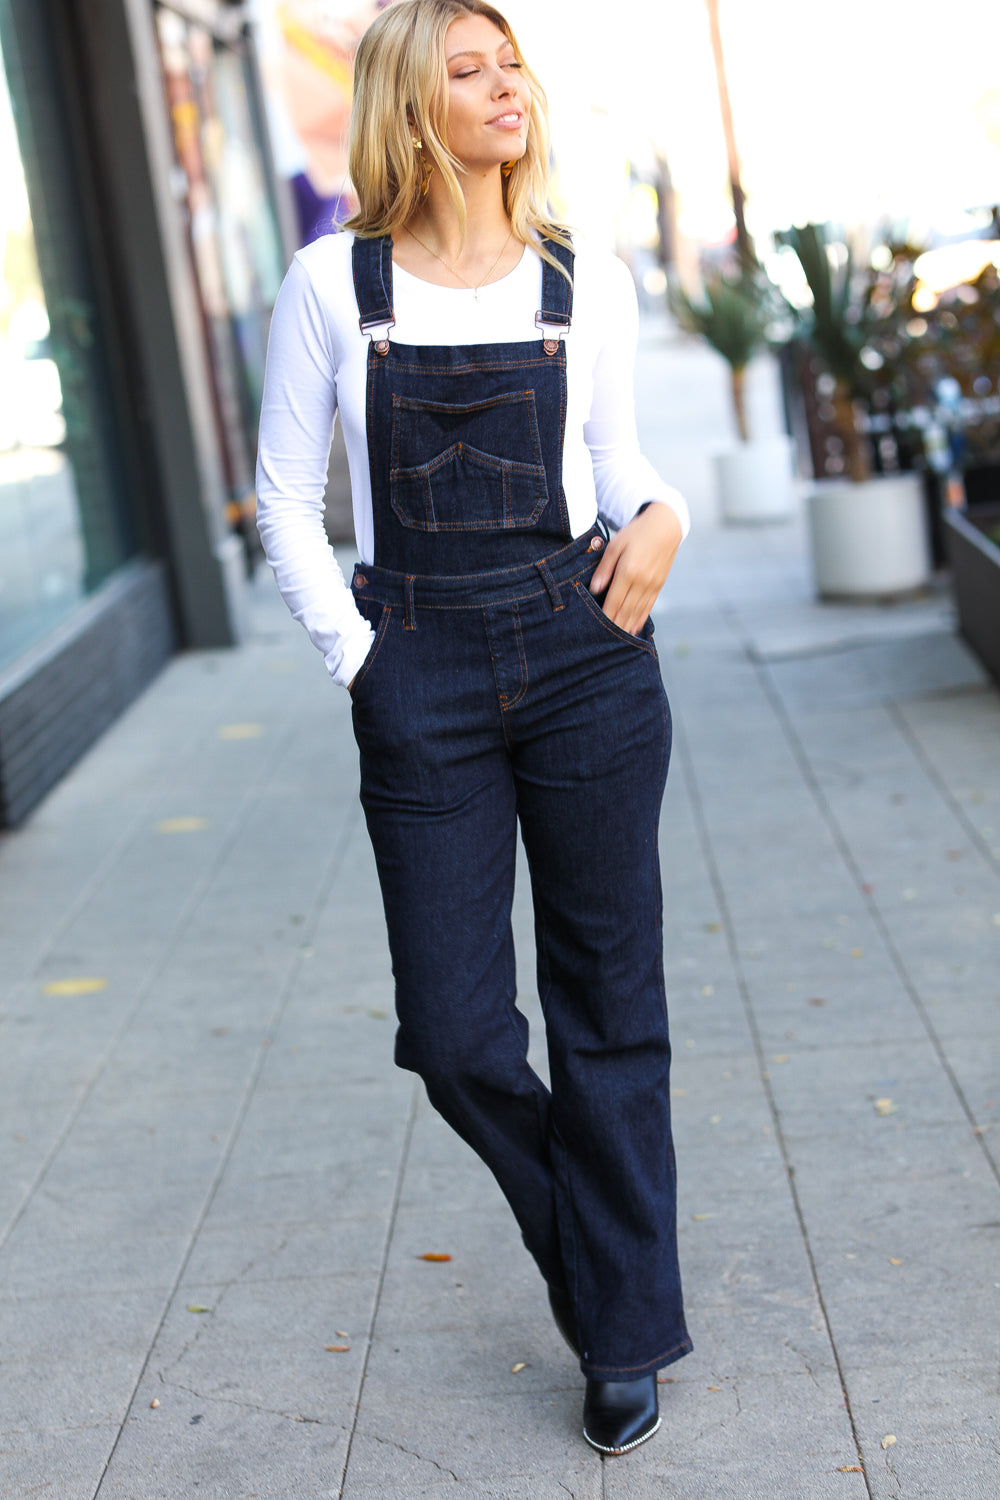 Just For You Dark Denim High Waist Wide Leg Overalls - Sybaritic Bags & Clothing